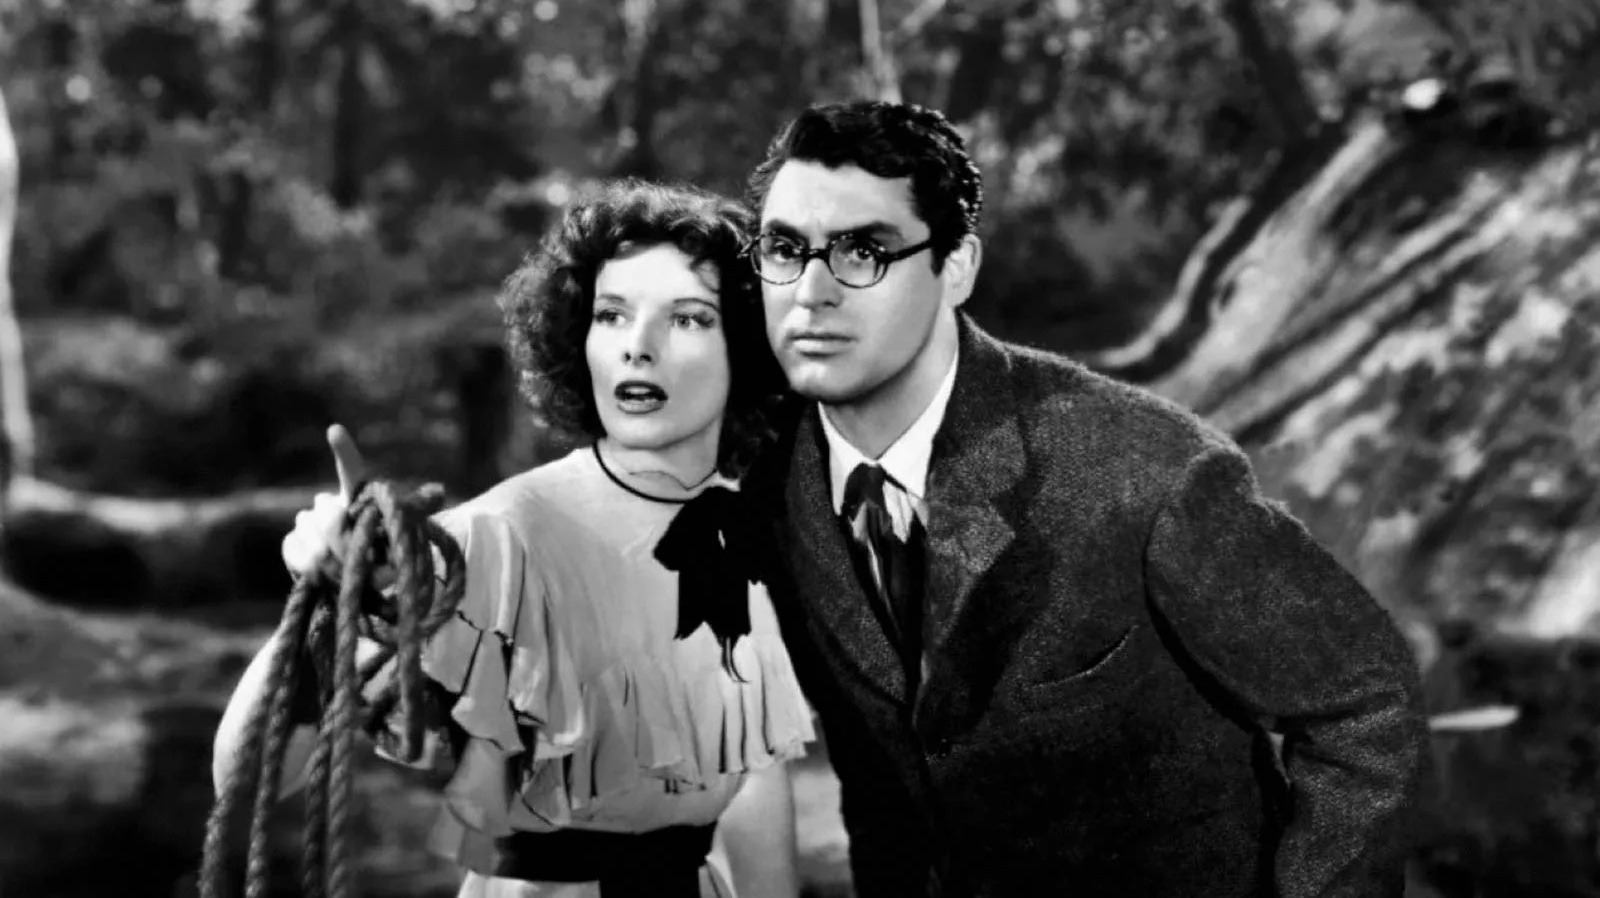 A woman holding a rope and a bespectacled man in a suit look intently off screen